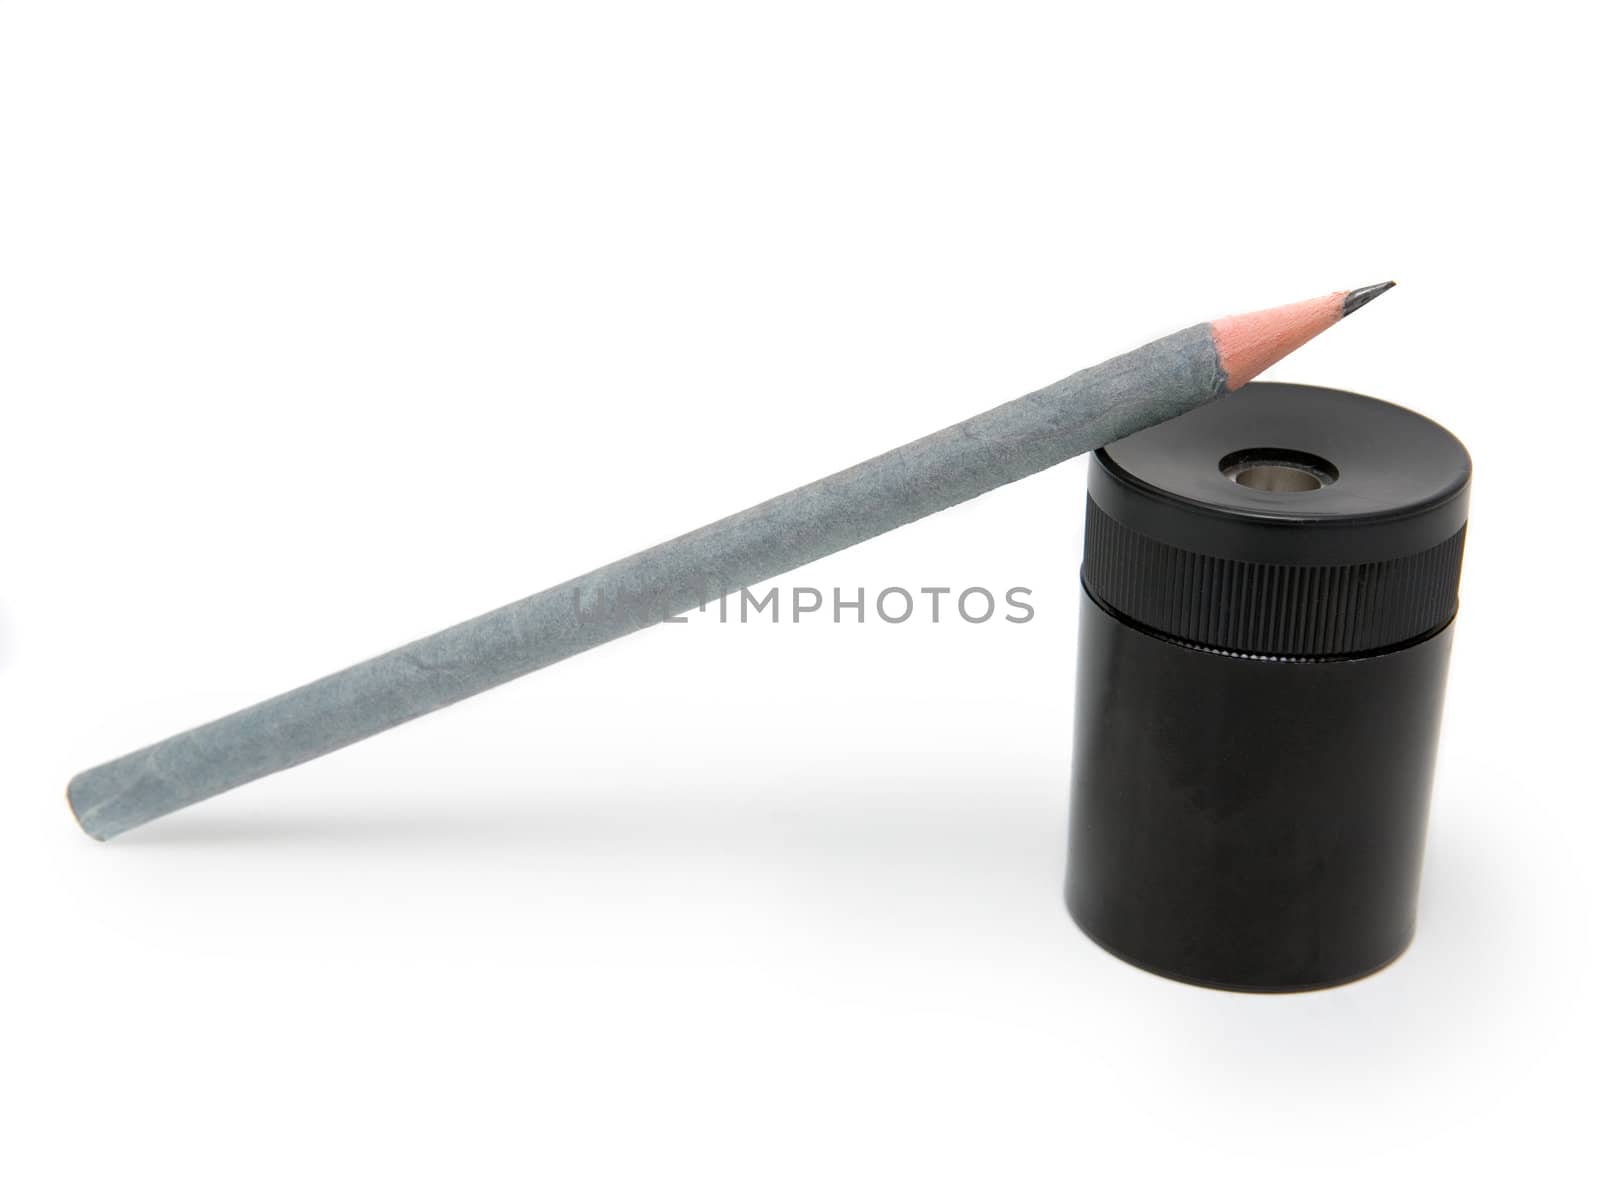 Sharpener and pen on a white background